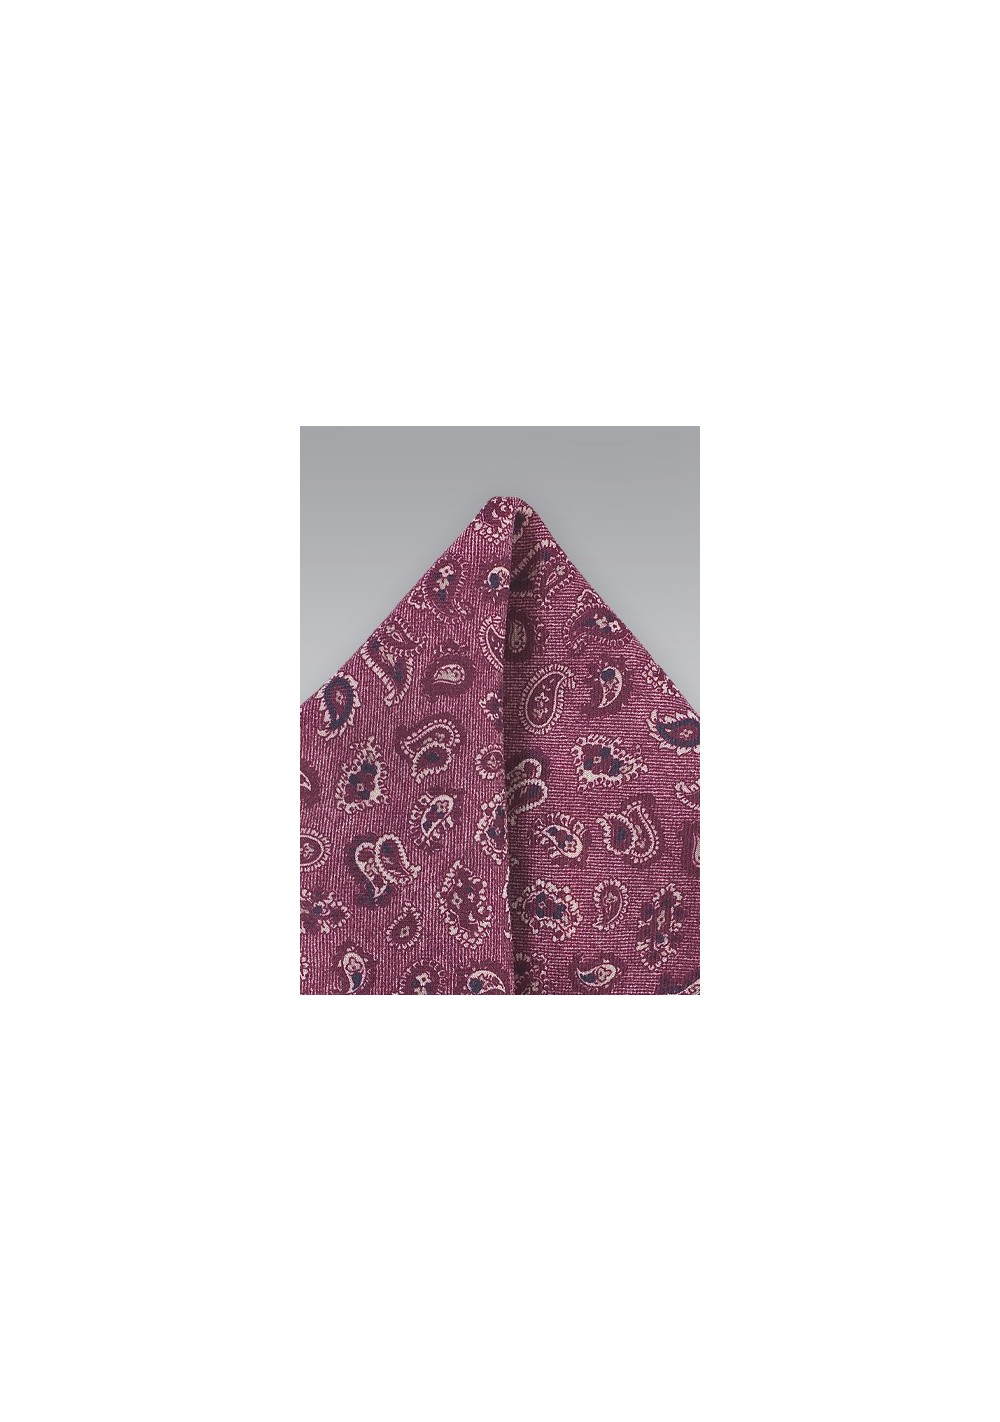 Wine Red Paisley Pocket Square in Wool